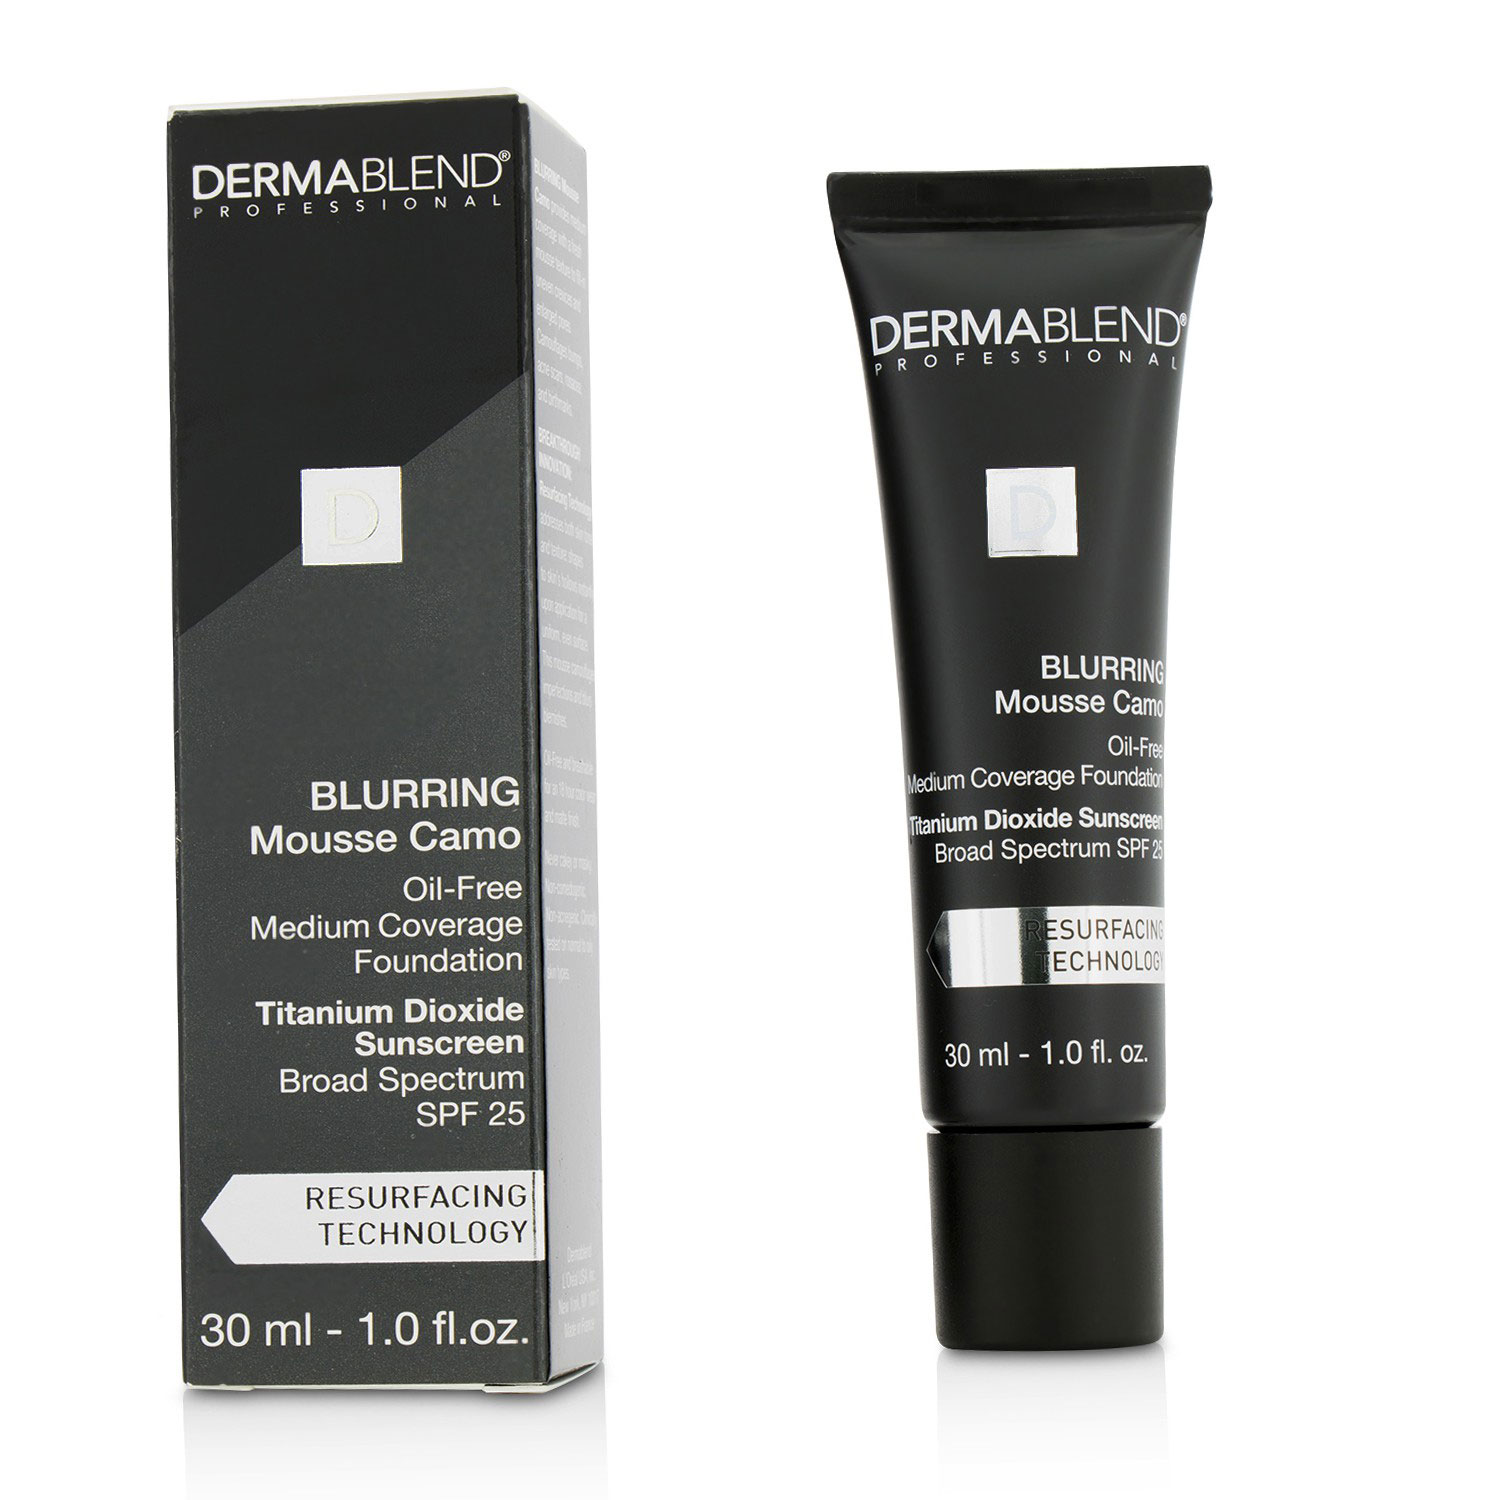 Blurring Mousee Camo Oil Free Foundation SPF 25 (Medium Coverage) - #35N Wheat Dermablend Image